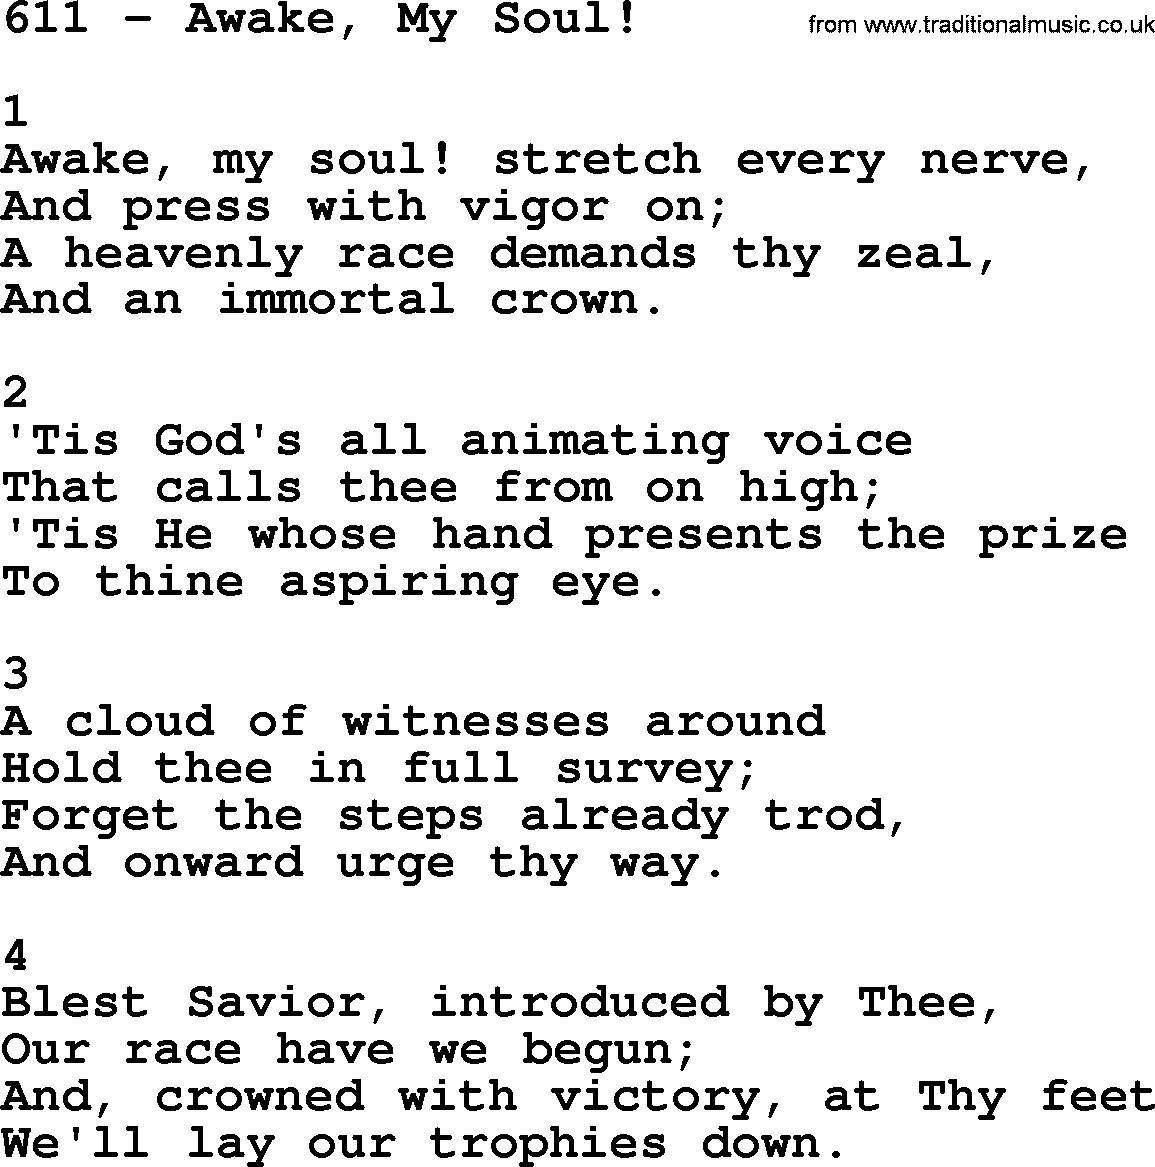 Complete Adventis Hymnal, title: 611-Awake, My Soul!, with lyrics, midi, mp3, powerpoints(PPT) and PDF,